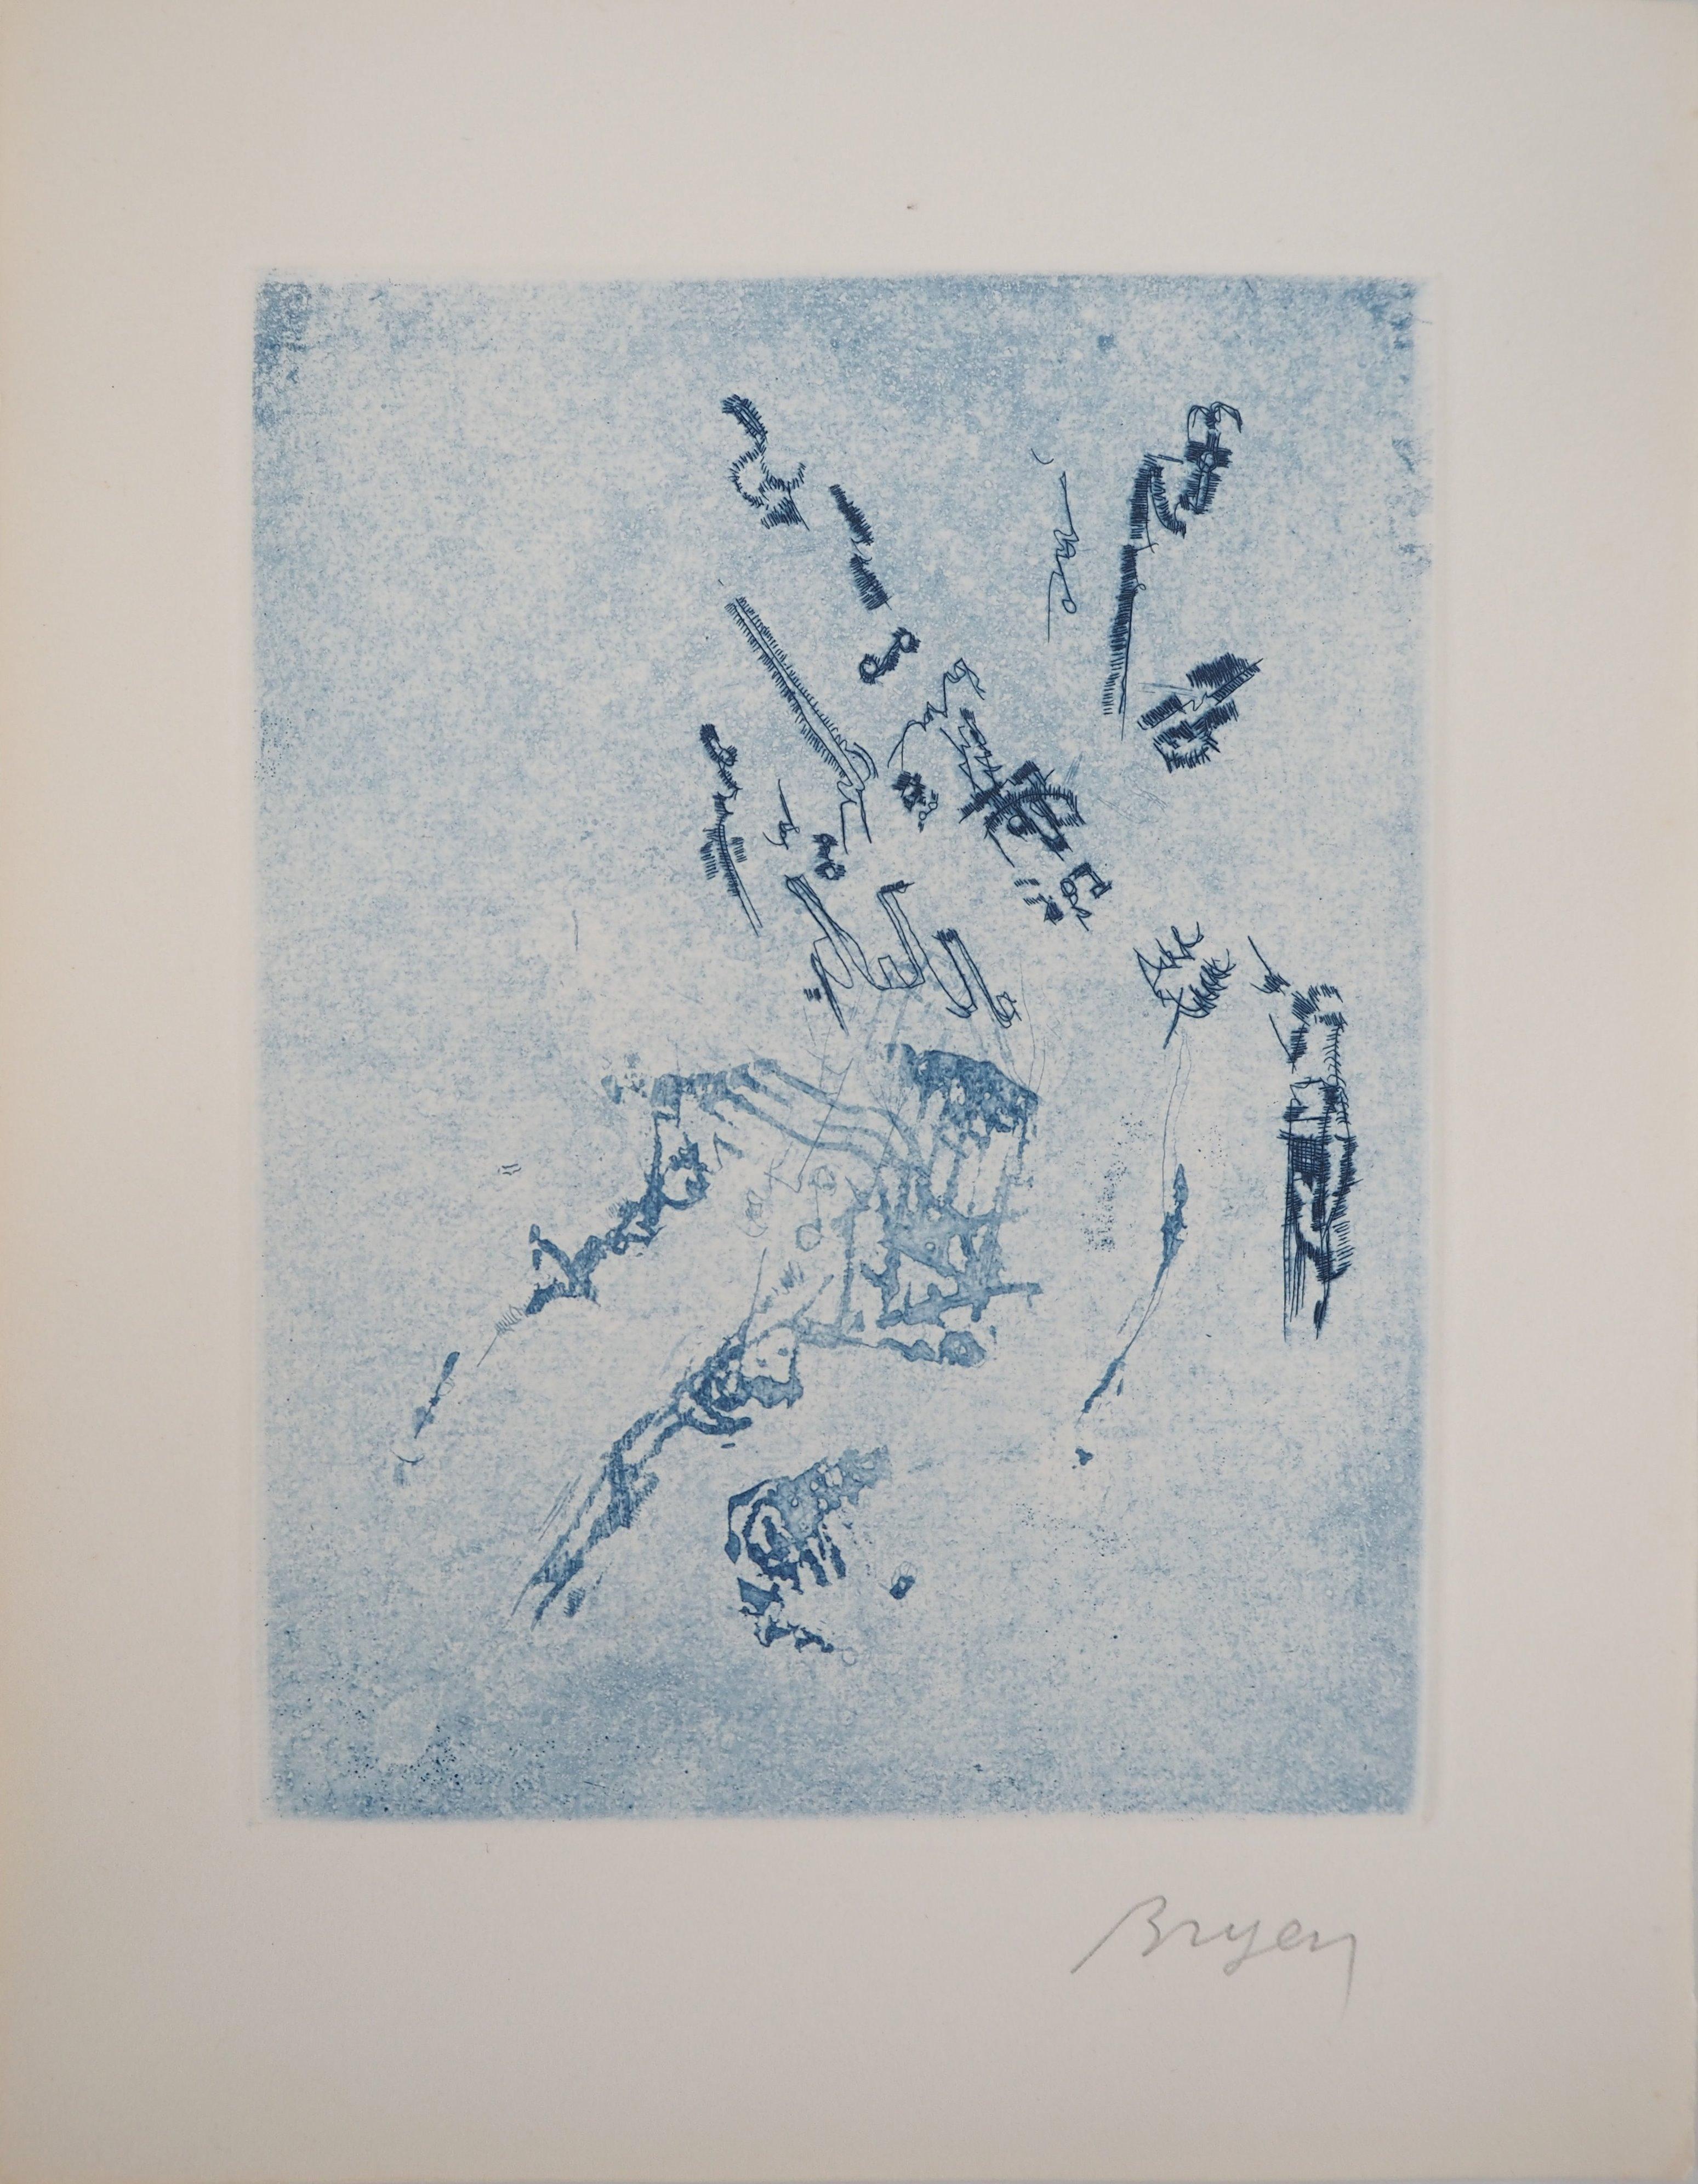 Camille Bryen Abstract Print - Reflection in Blue - Original Etching, Signed